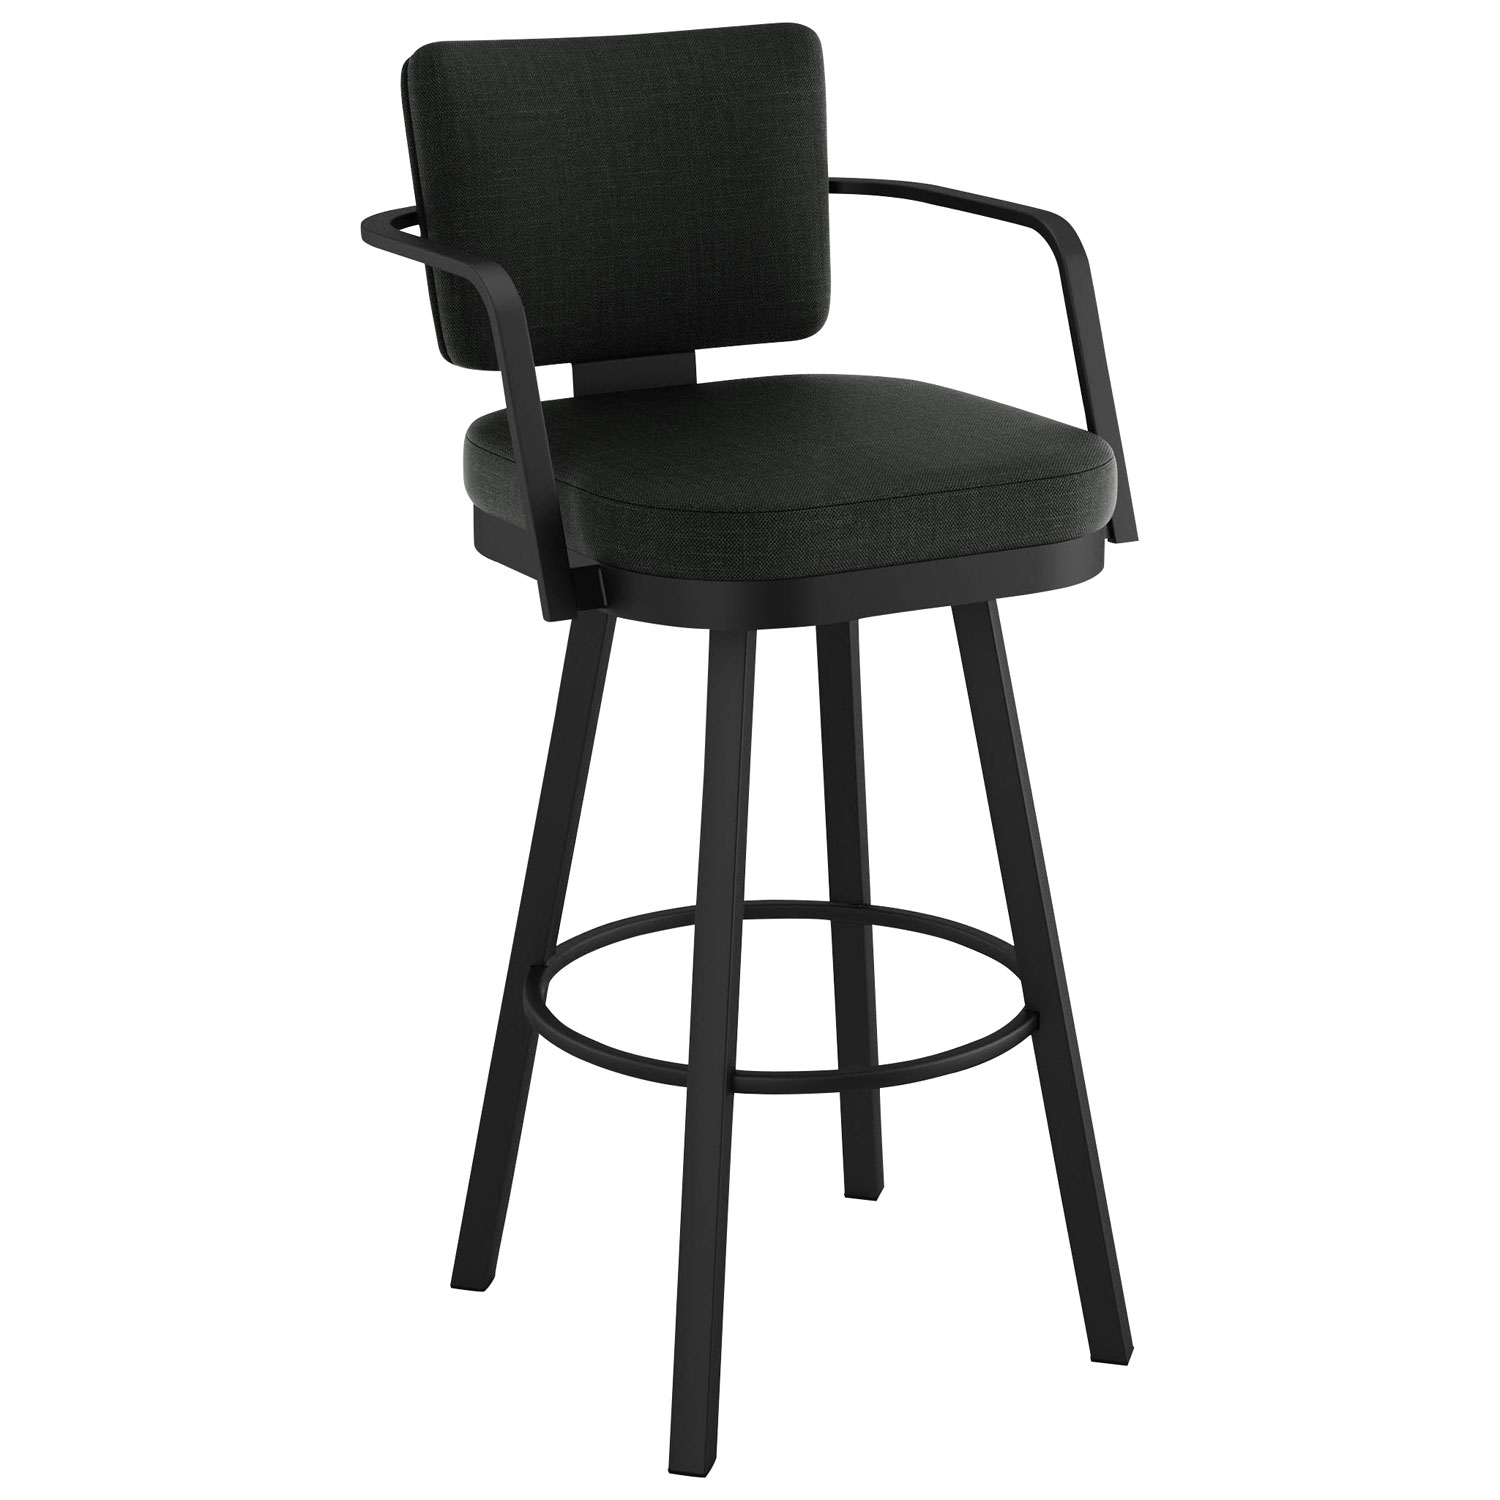 Thea Rustic Country Bar Height Barstool - Black/Black